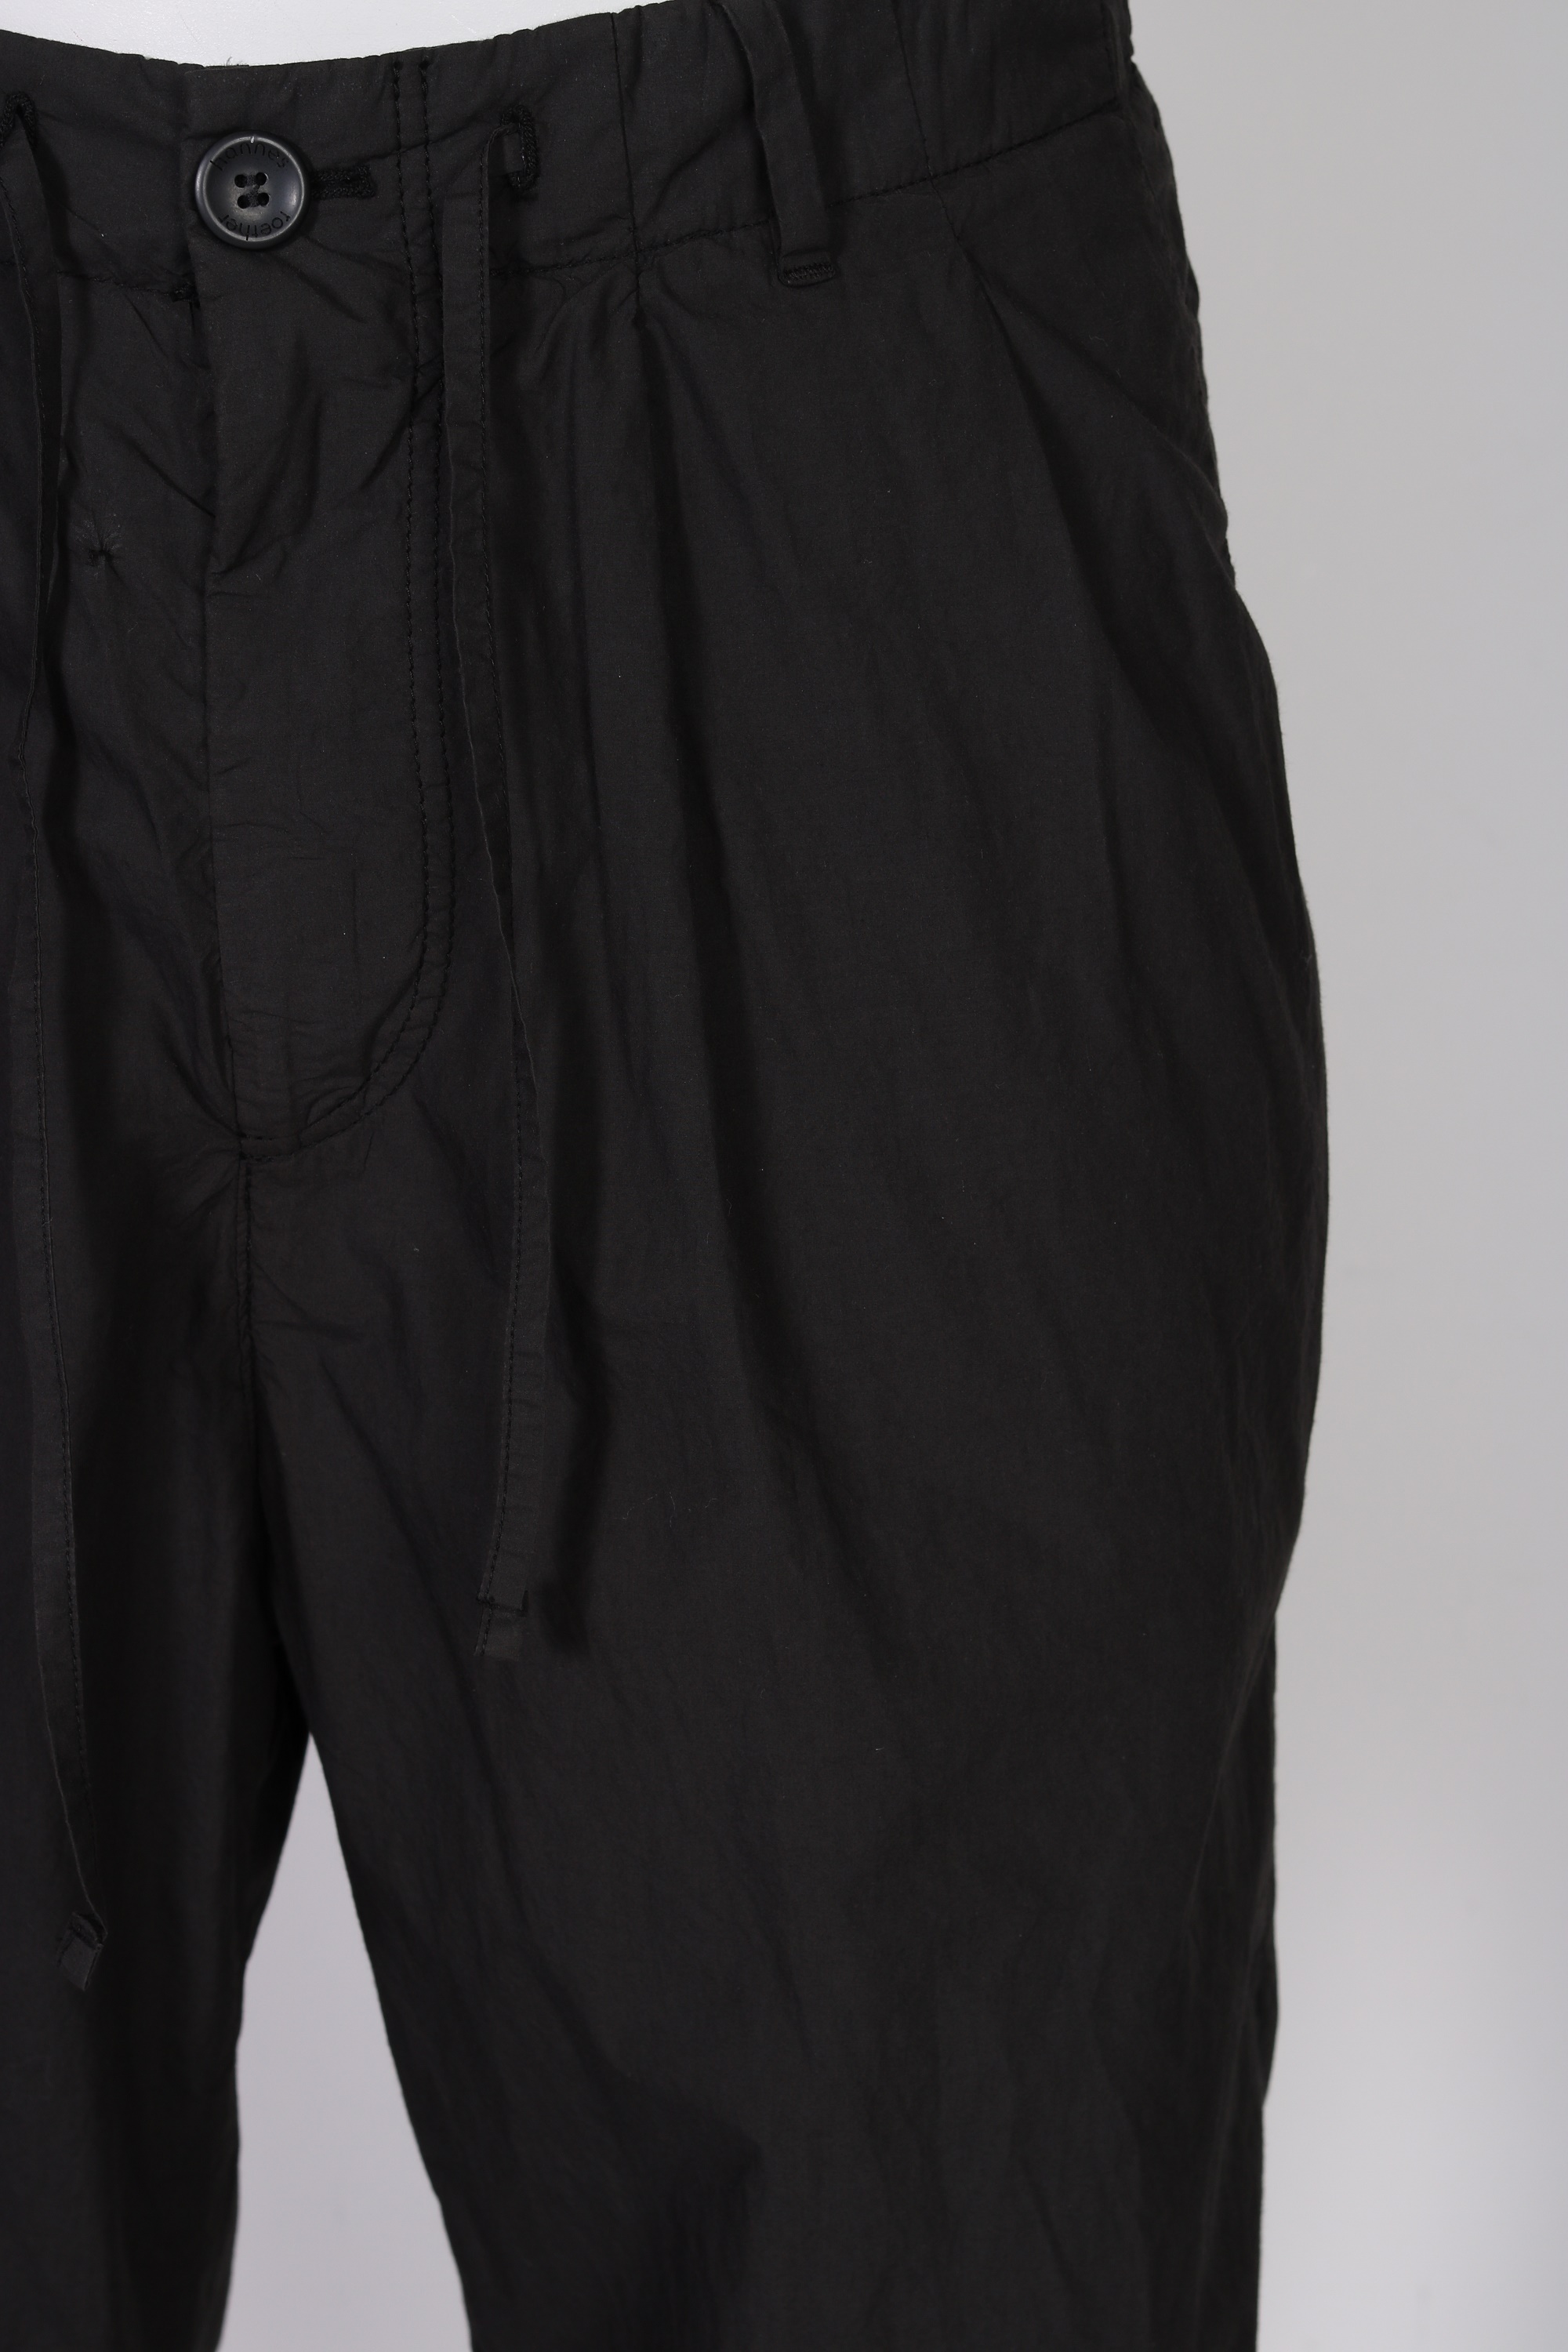 Hannes Roether Trousers in Black